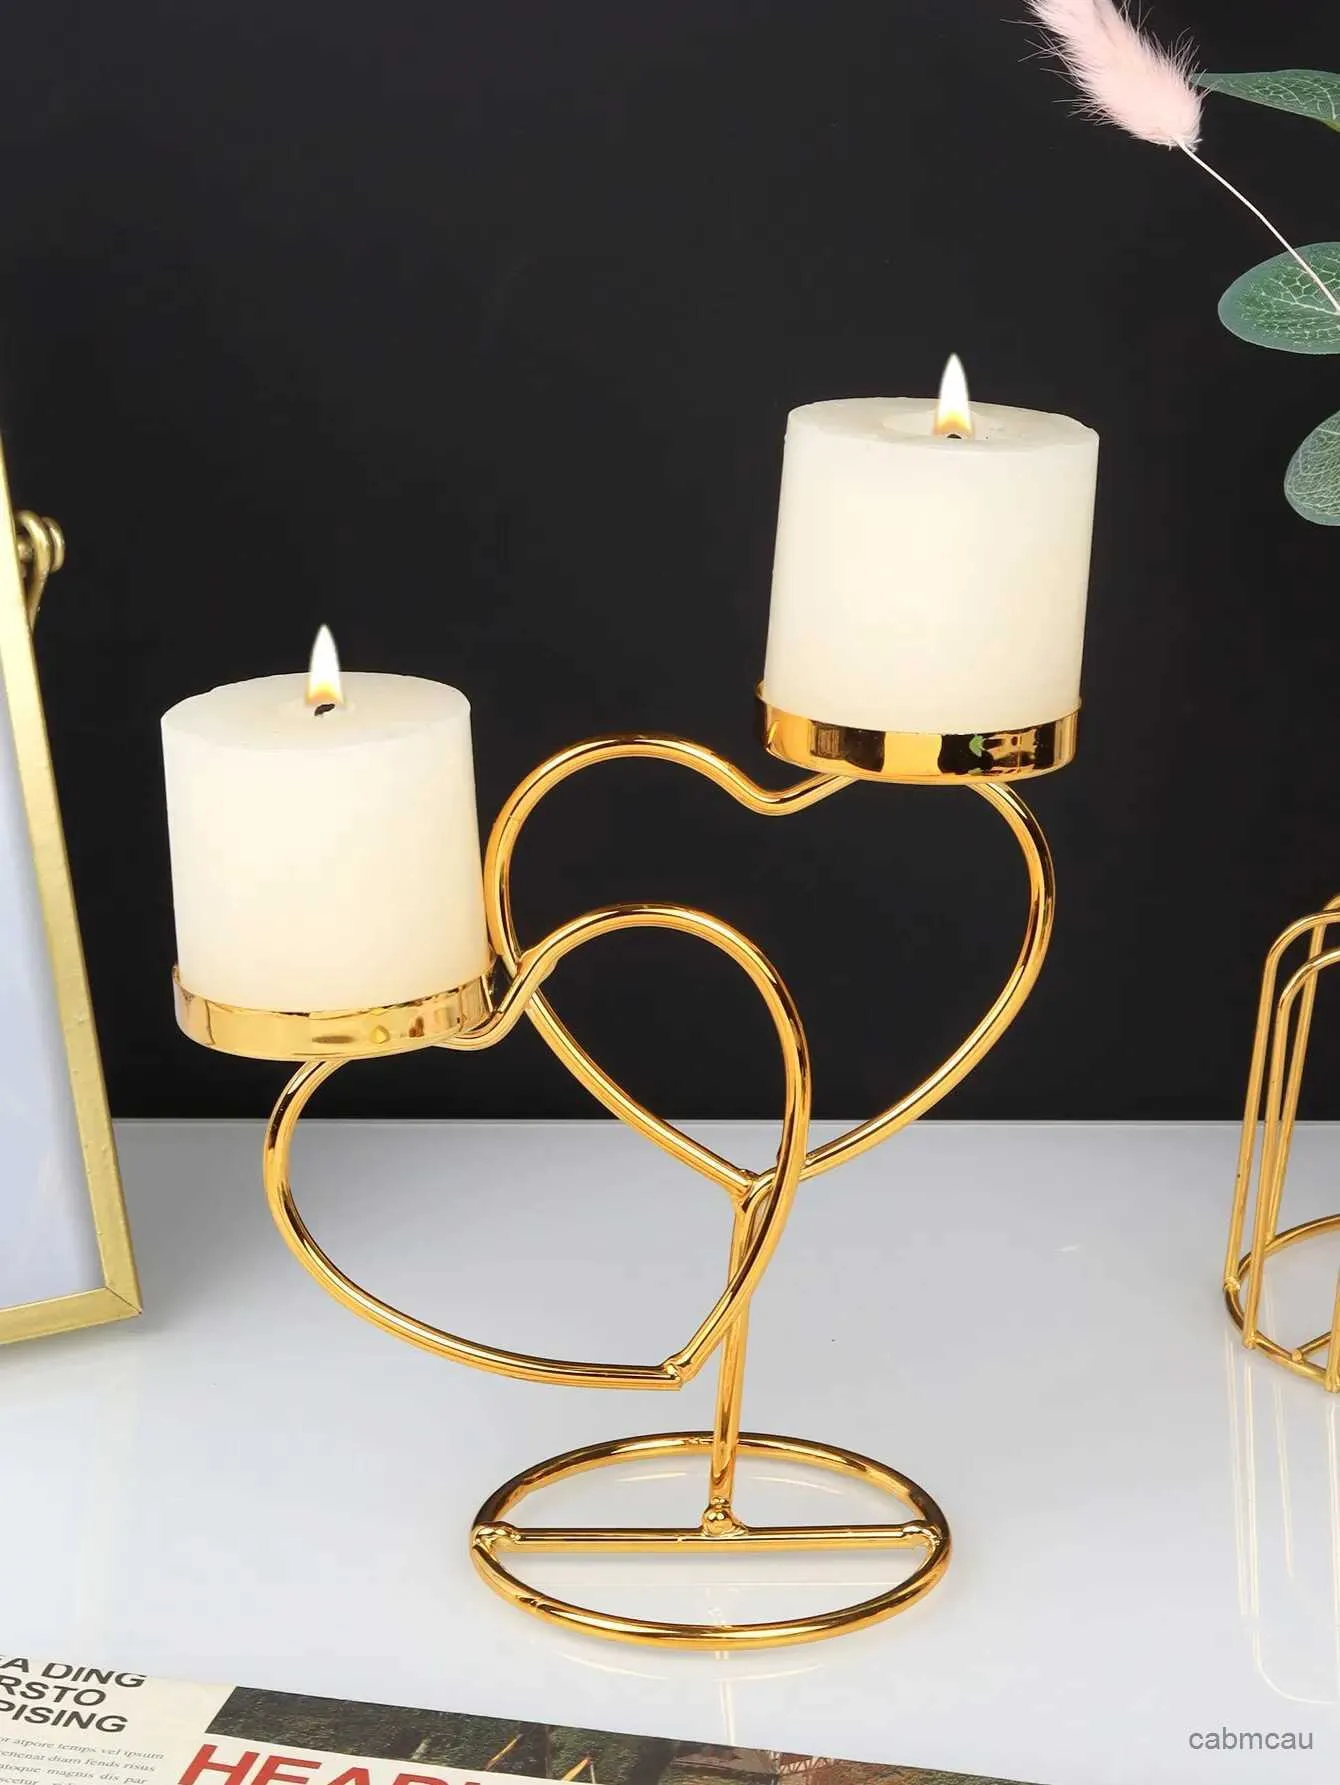 2st Candle Holders 1pc Iron Art Candlestick Hotel Home Decoration Romantic Candlelight Dinner Props Light Luxury Aromatherapy Candlestick Holder